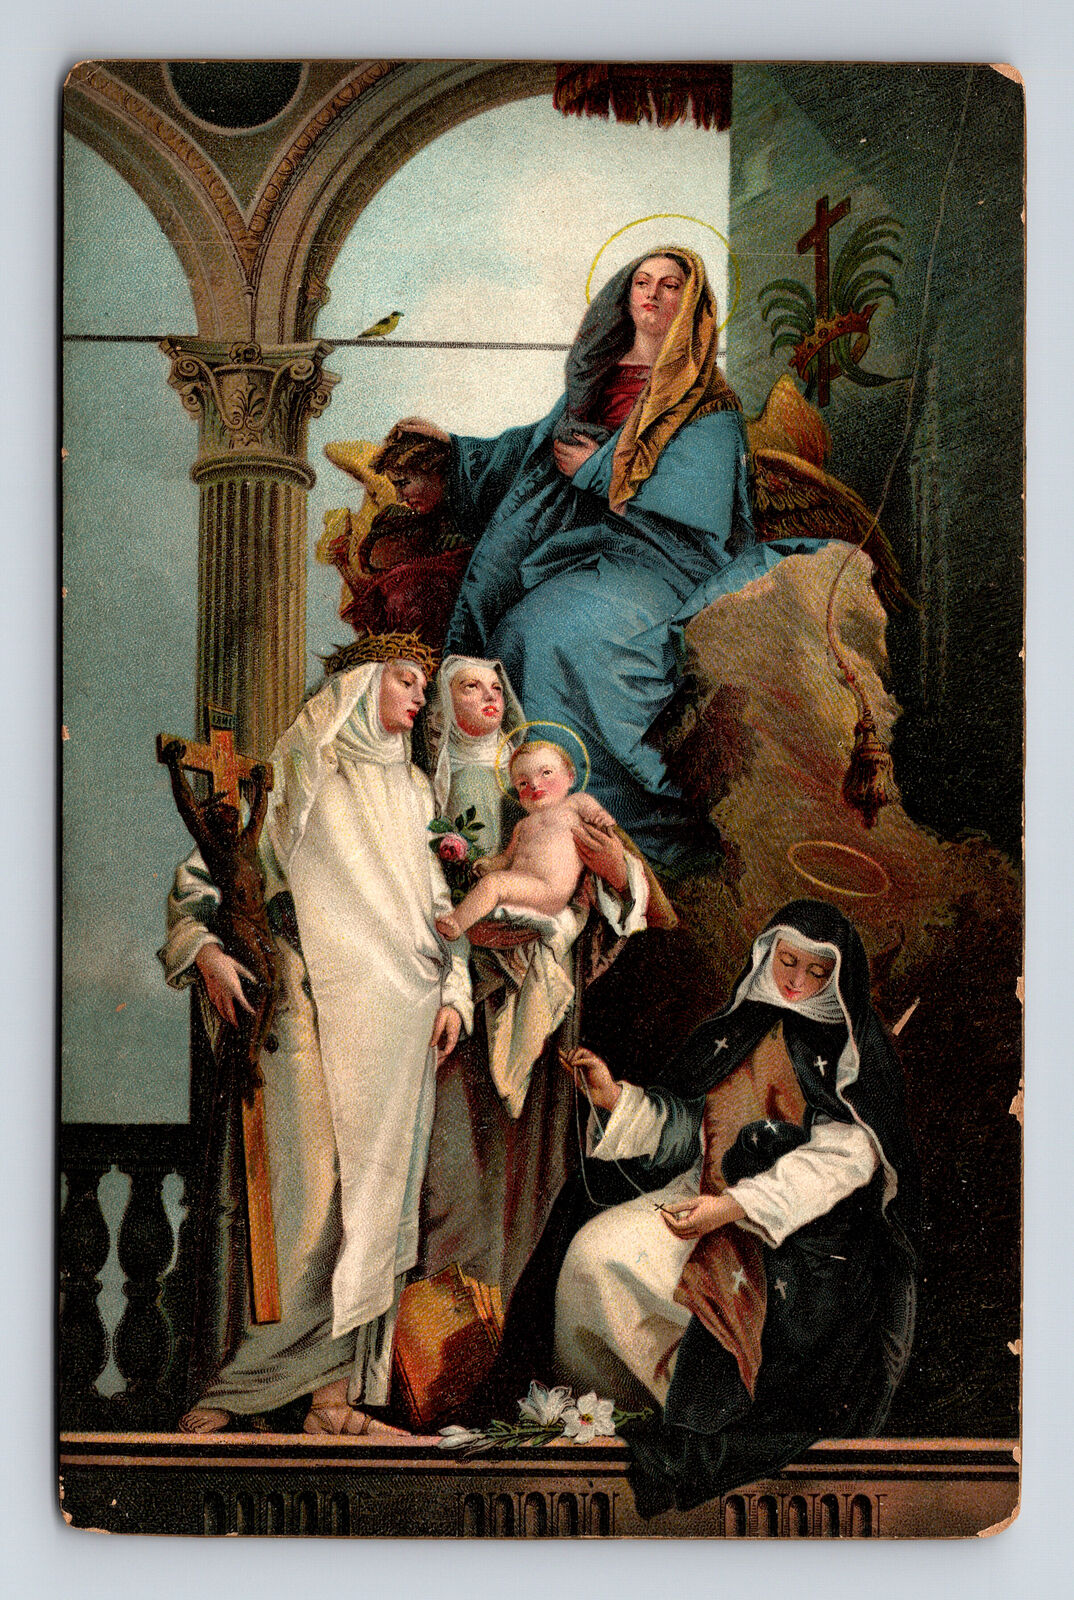 Stengel La Madonna The Virgin Appearing to Dominican Saints by Tiepolo Postcard